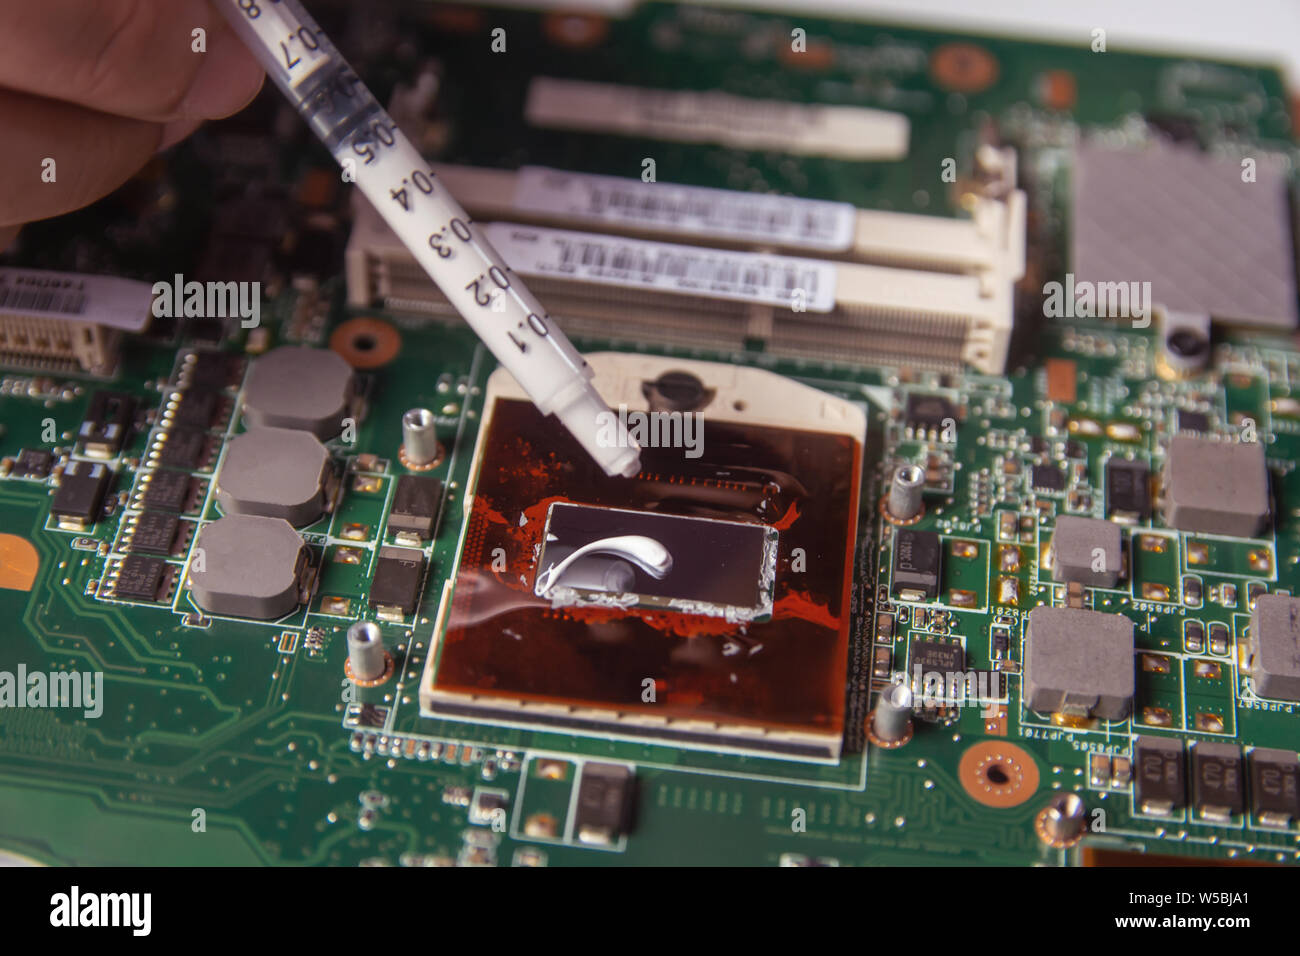 How to apply thermal paste to a CPU - Tech Advisor